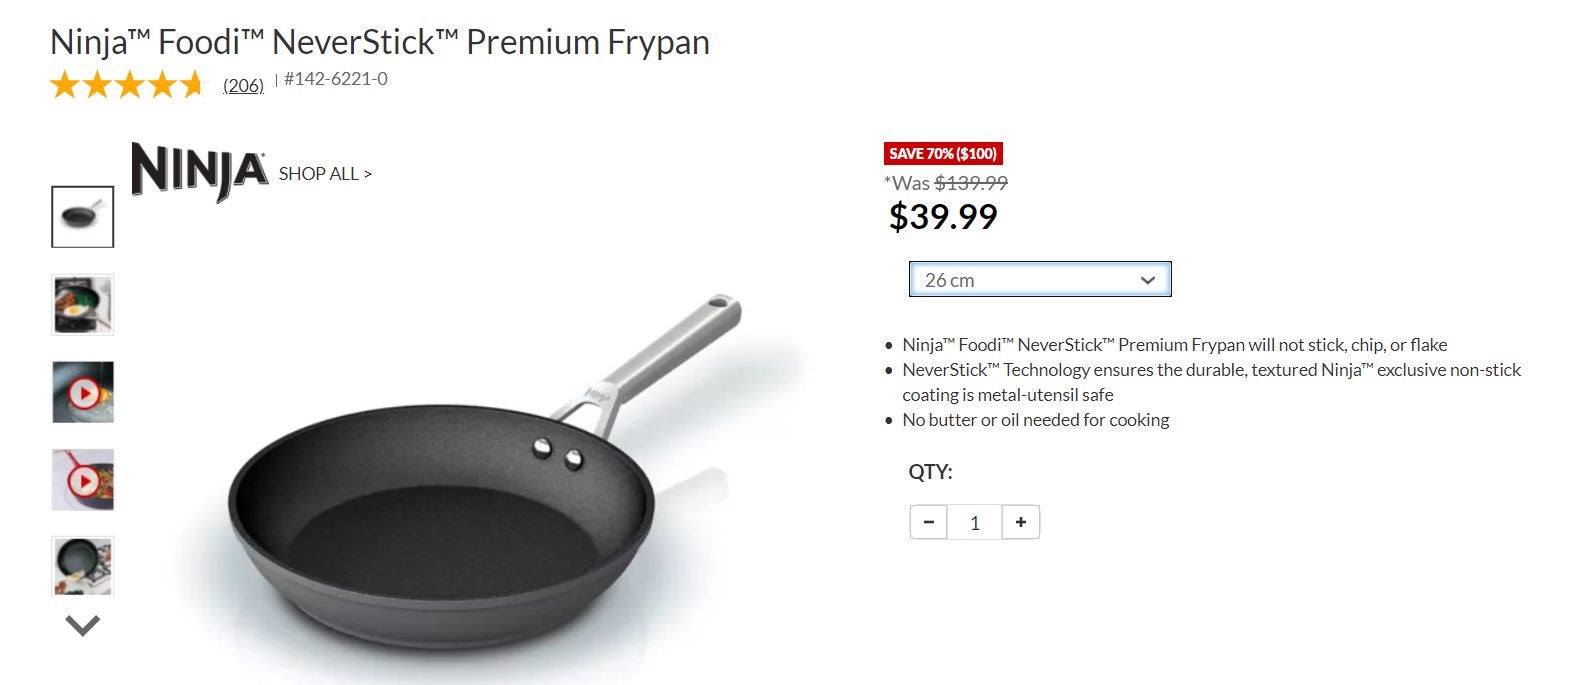 Switching up my cookware to the Ninja Foodi NeverStick from @costco! #